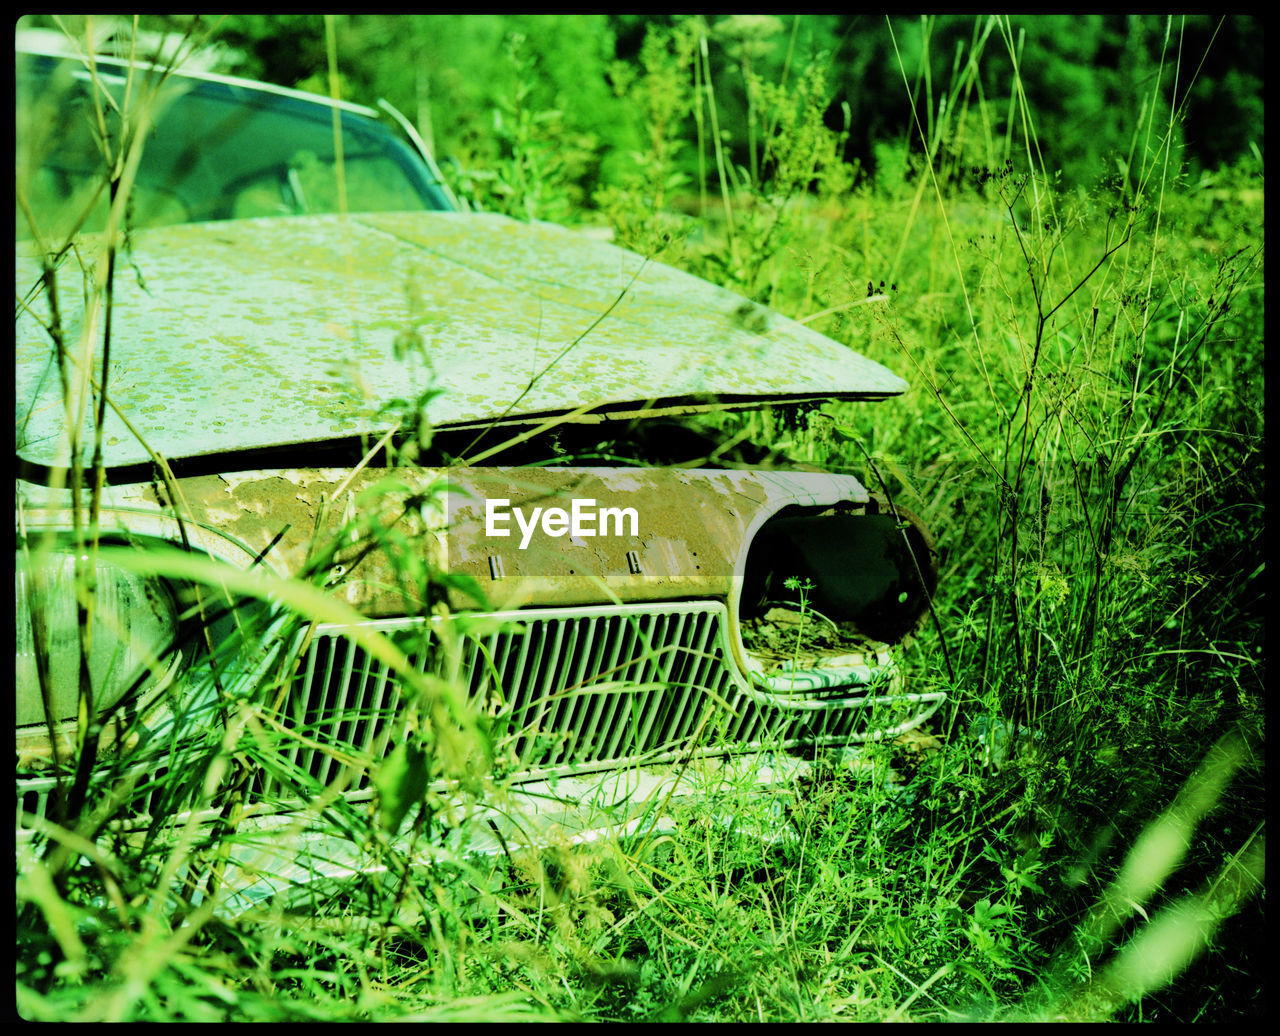 At the Magical Car Cemetery of Båstnäs Abandoned Analogue Photography Bushes Båstnäs Car Cemetery Cars Forrest History Industry Machines Magic Nature Nature Taking Over Outdoors Past Plants Plaubel Makina 67 Rust Scrap Scrap Metal Summer Sweden Trip Xpro